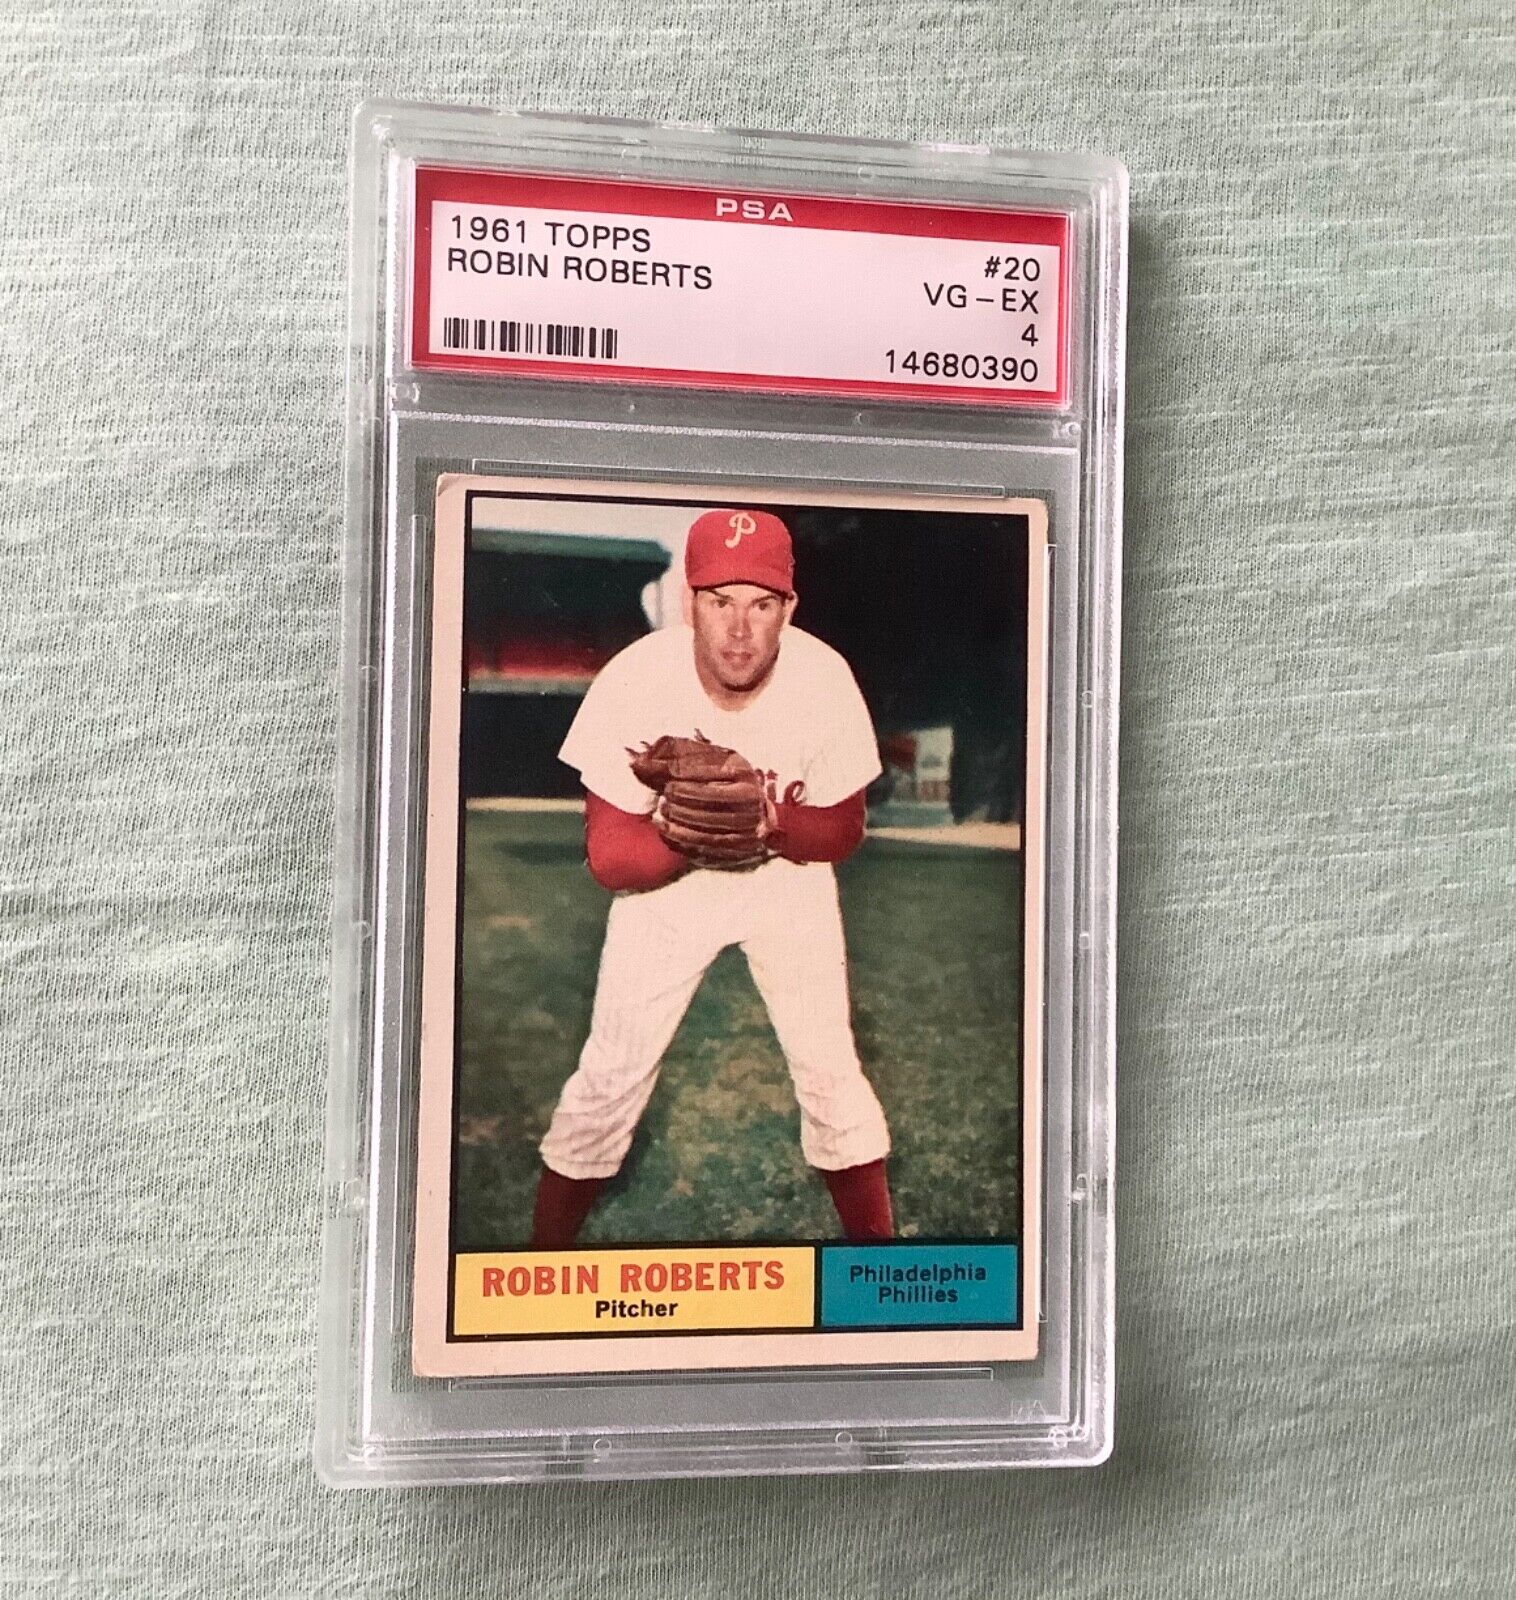 1961 Topps #20 Robin Roberts Phillies HALL OF FAME 286 WINS PSA 4 VG-EXCELLENT